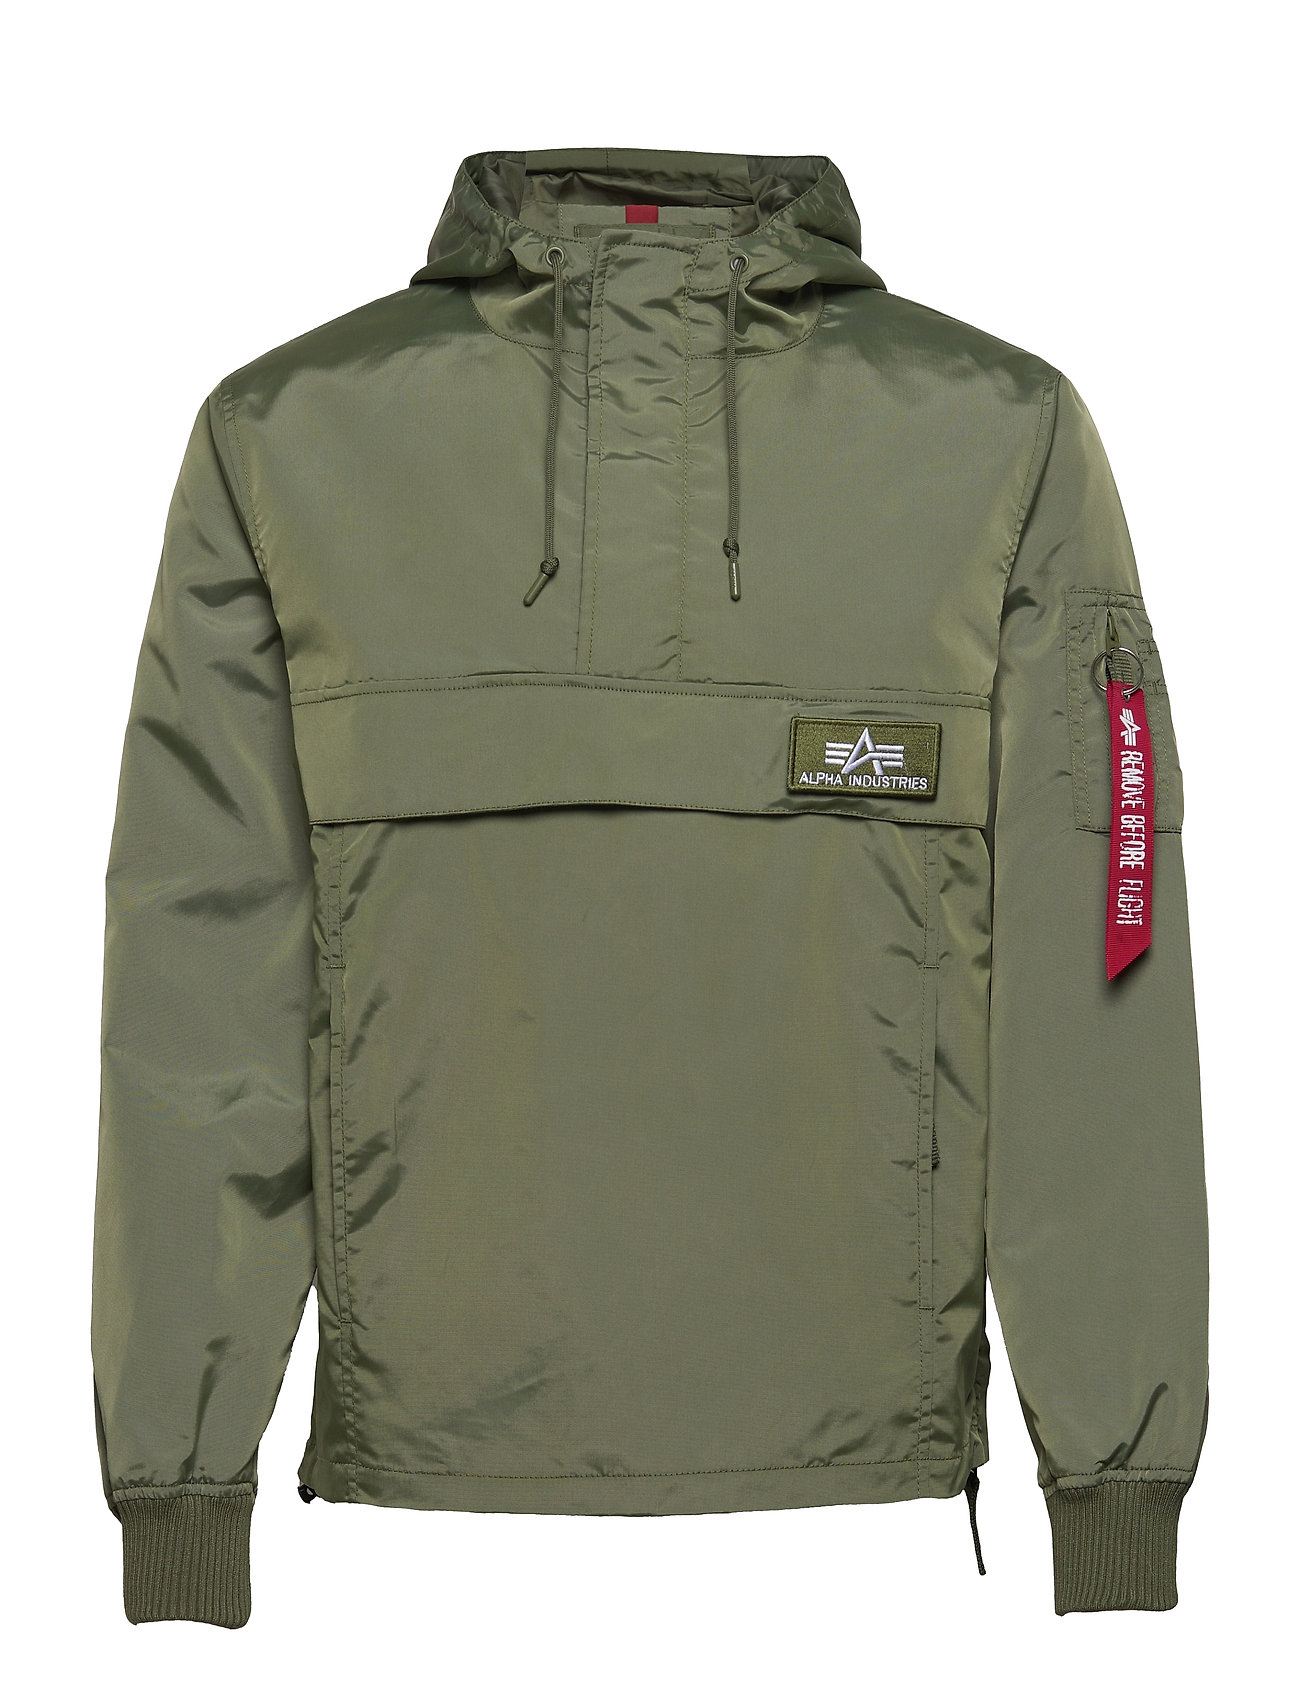 Alpha Industries Tt Anorak Lw - 140 €. Buy Anorak from Alpha Industries  online at Boozt.com. Fast delivery and easy returns